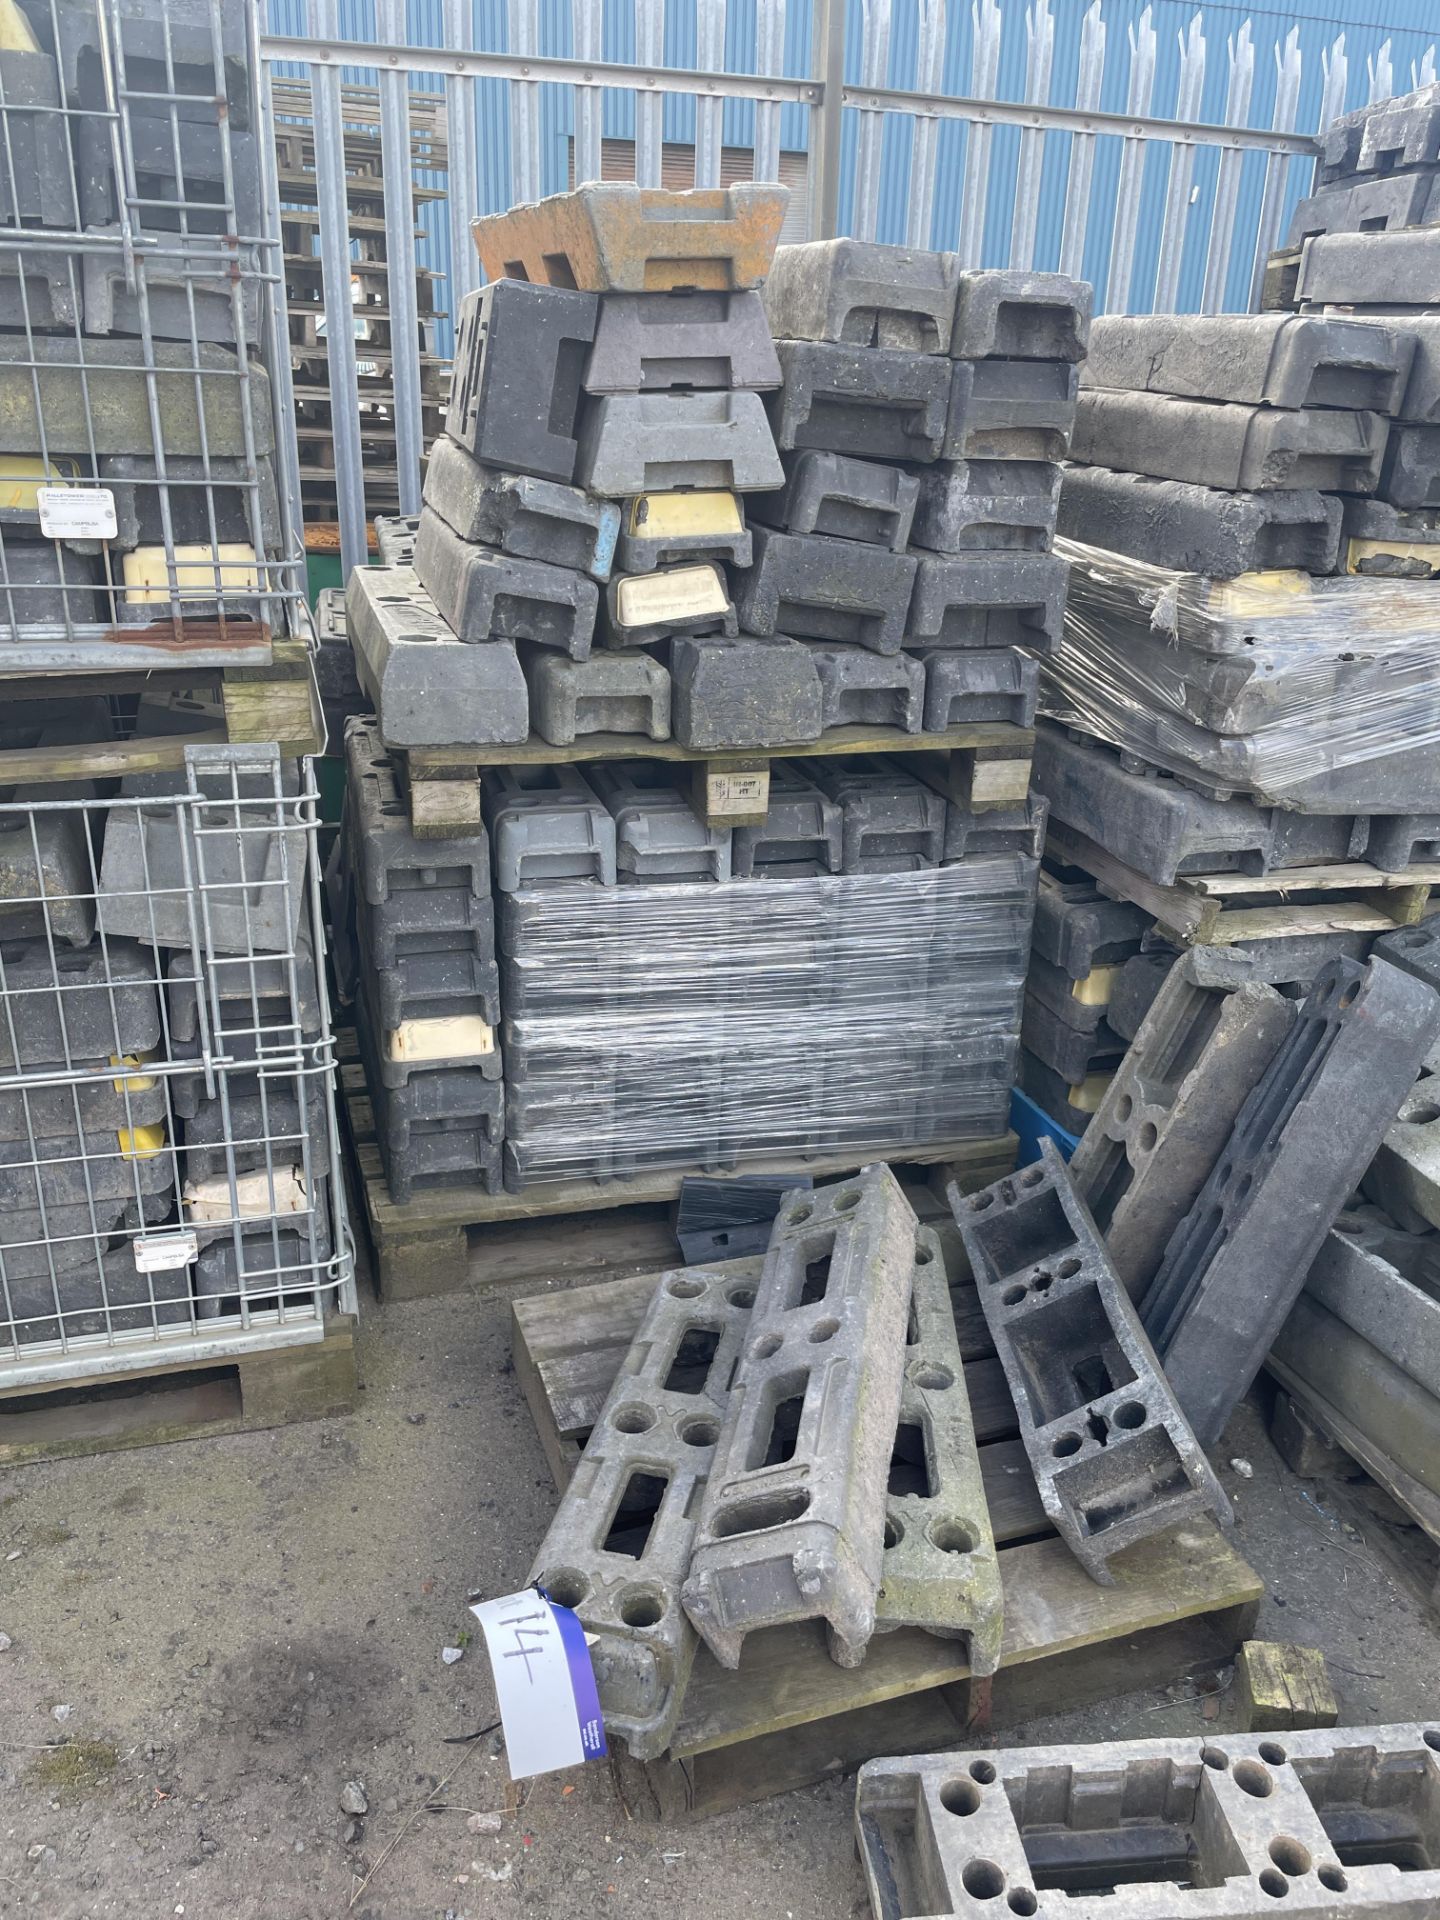 Rubber Feet Fencing Blocks, mainly on pallets and on floor in one line Please read the following